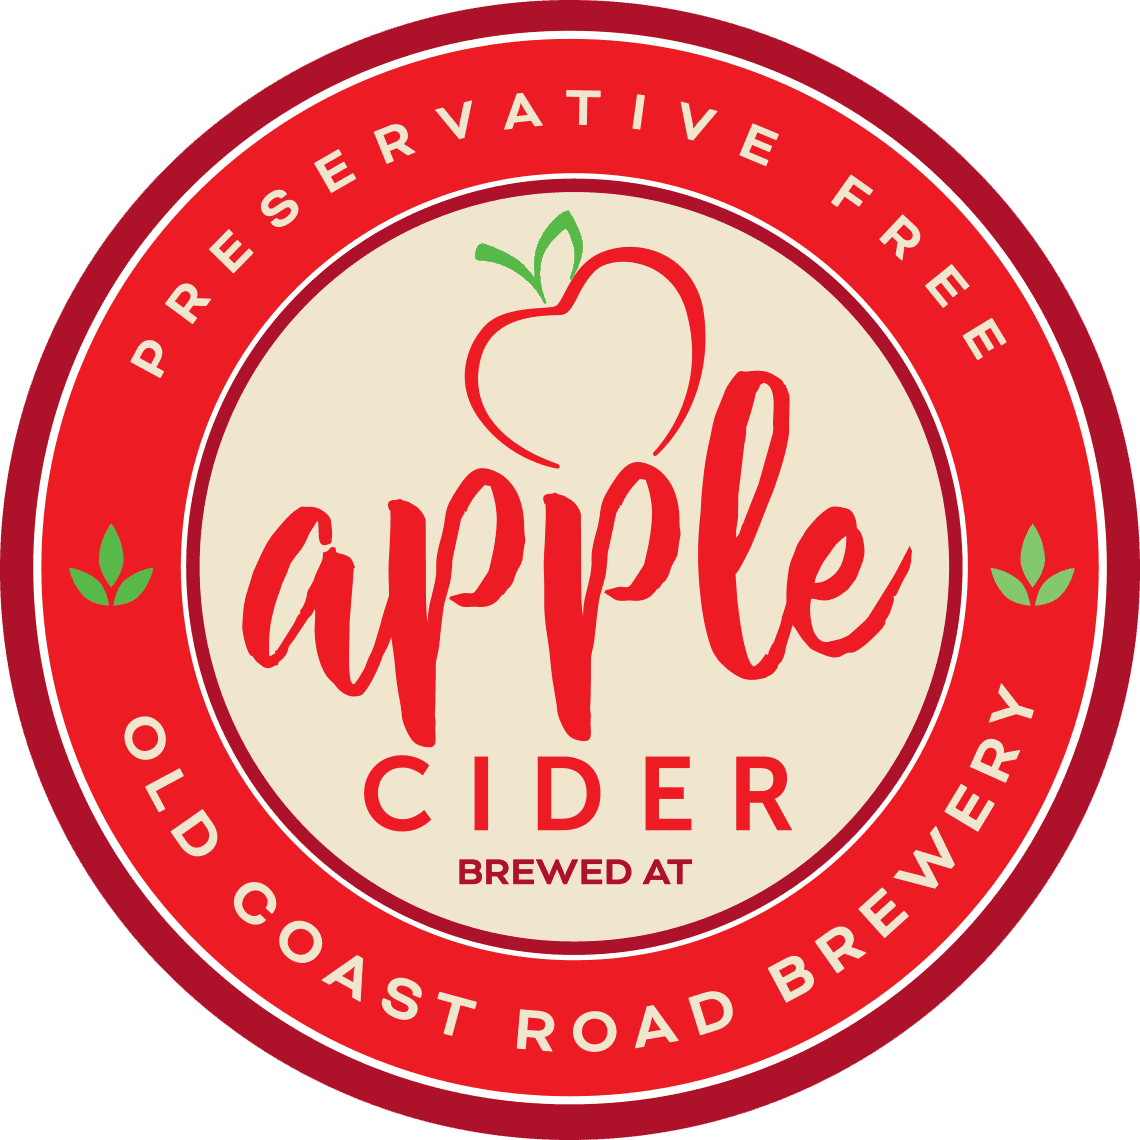 Made by our brewer from southwest apples. We try to keep it middle of the road in terms of sweetness to satisfy a broad range of palates.